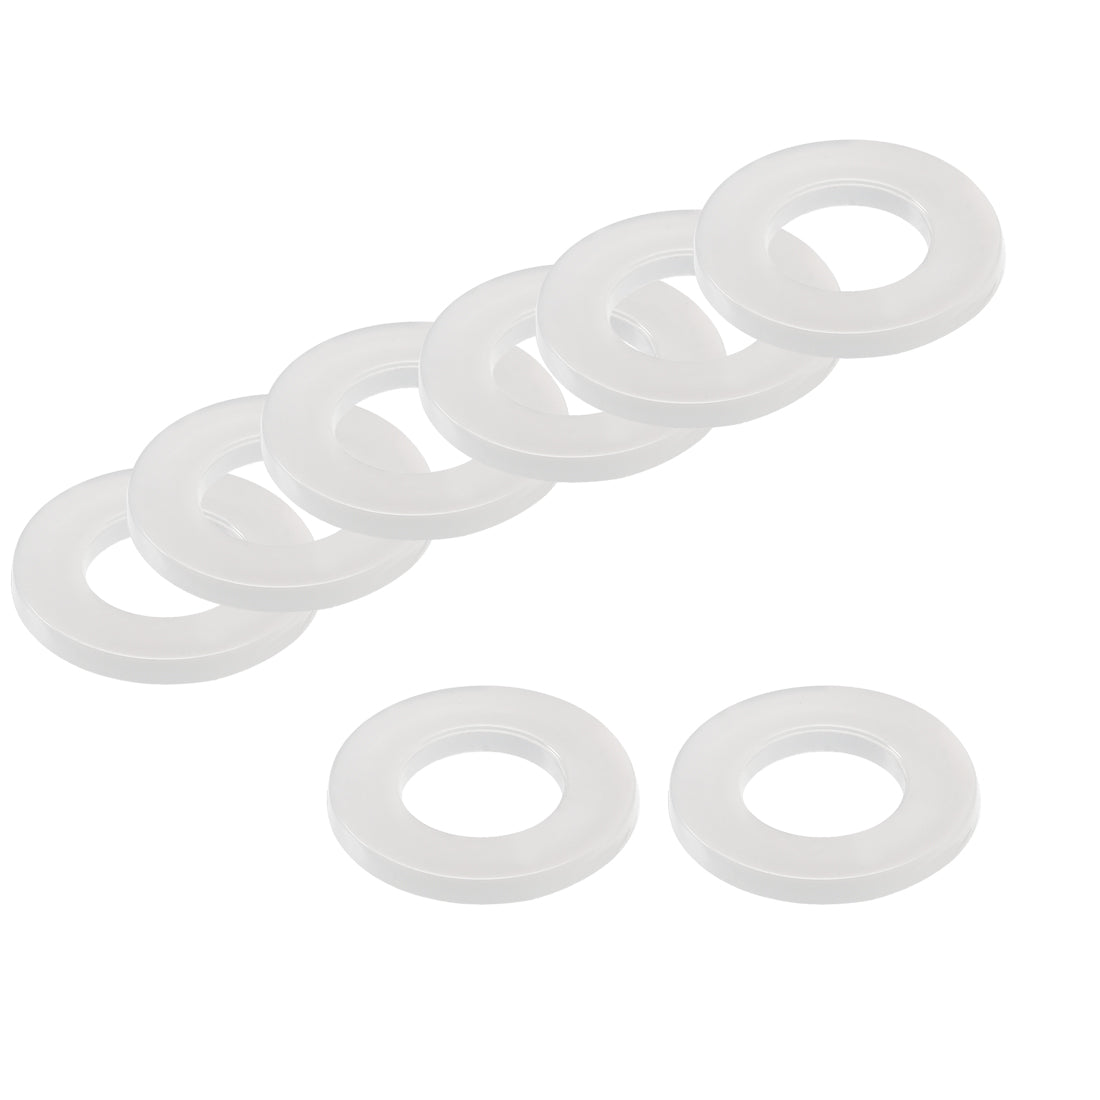 uxcell Uxcell Insulating Washer, 80Pcs 8mm x 16mm x 1.5mm White Vulcanized Fiber Washer, Insulation Gasket for Motherboard